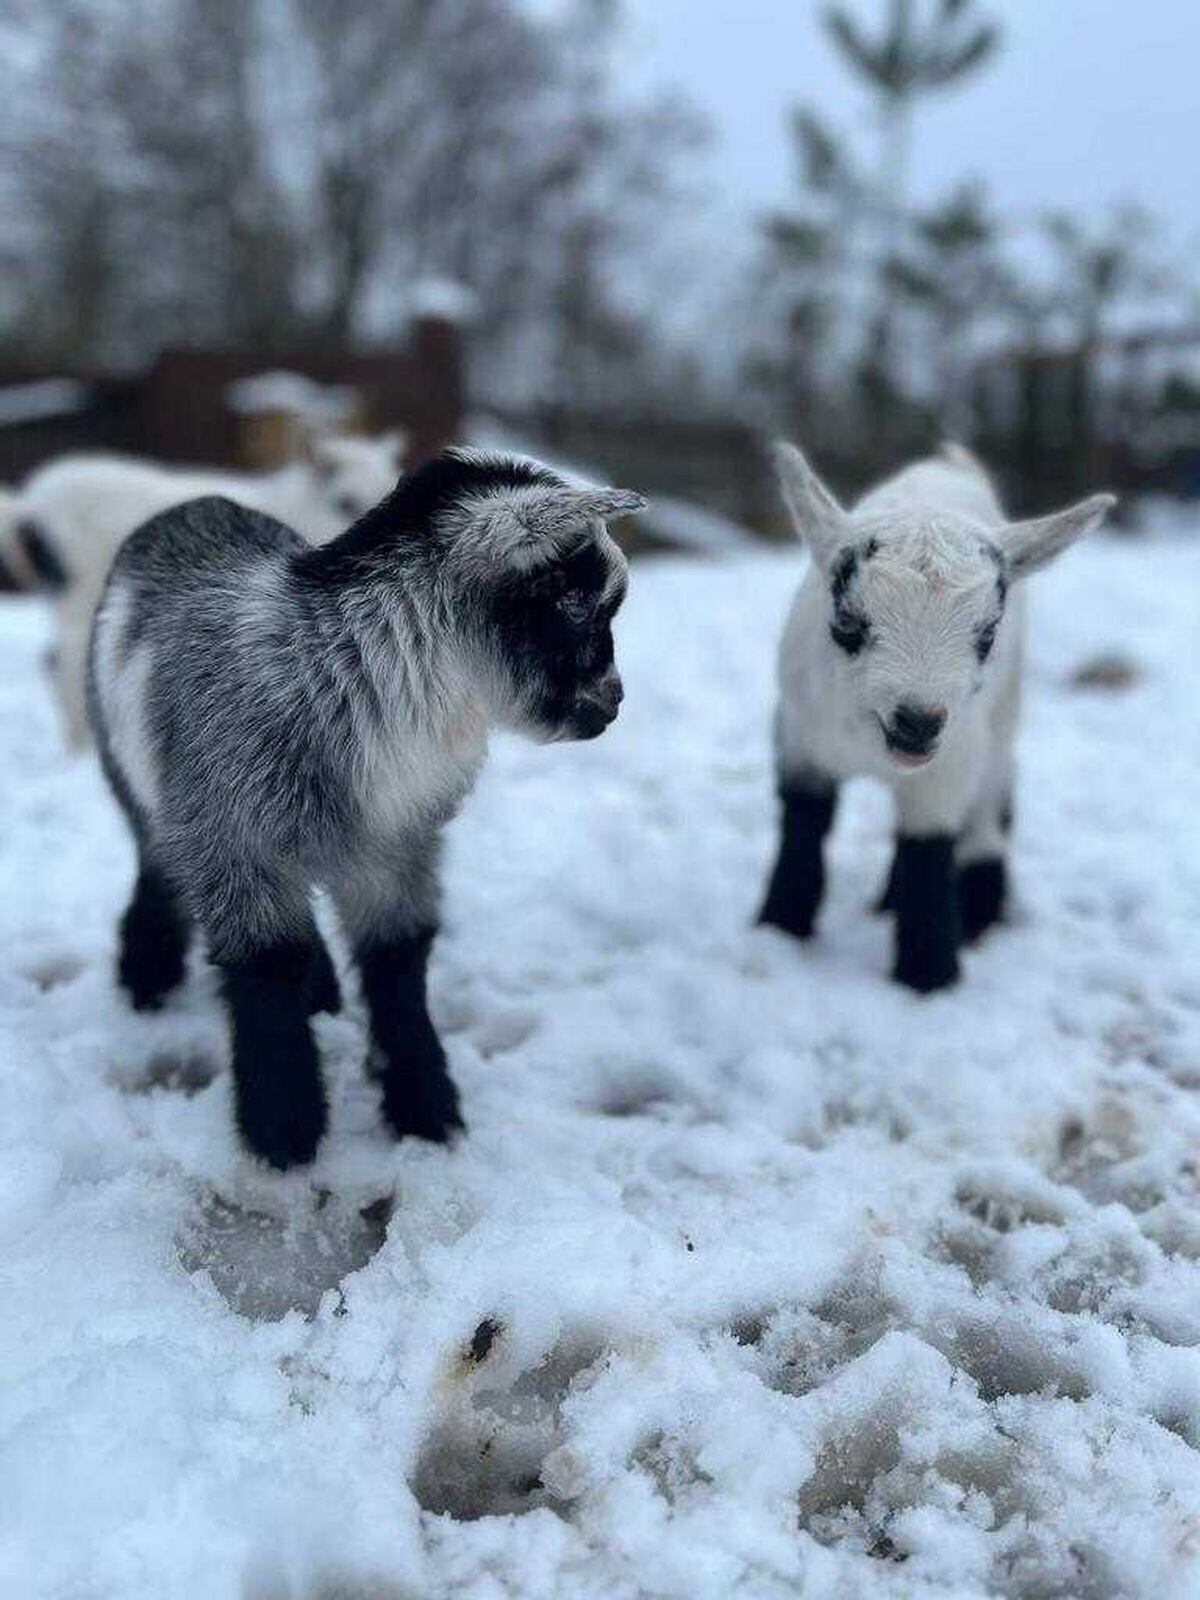 The baby goats. Photo: Telford's Exotic Zoo